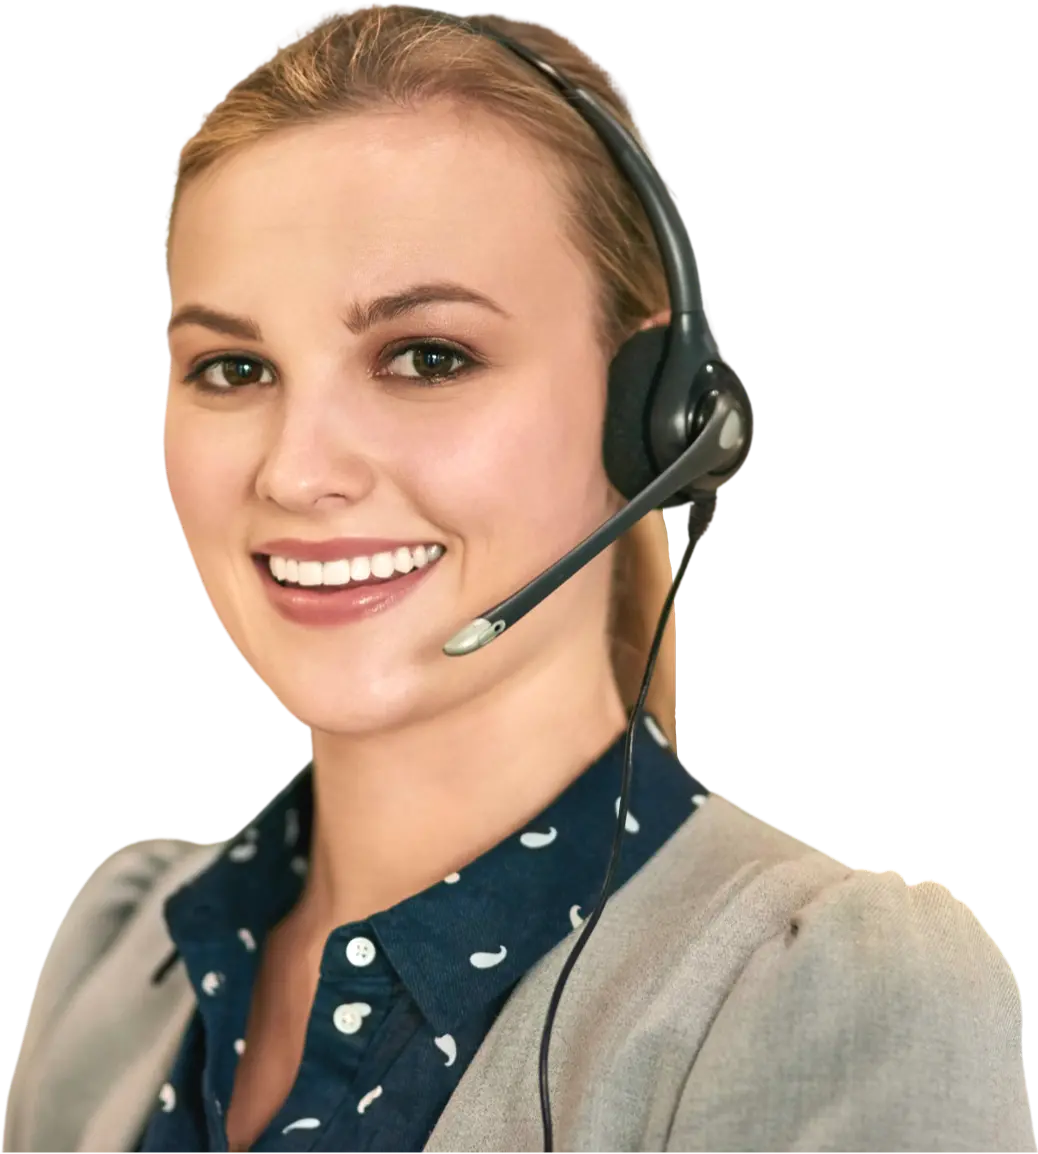 a woman in headphones smiling at the camera